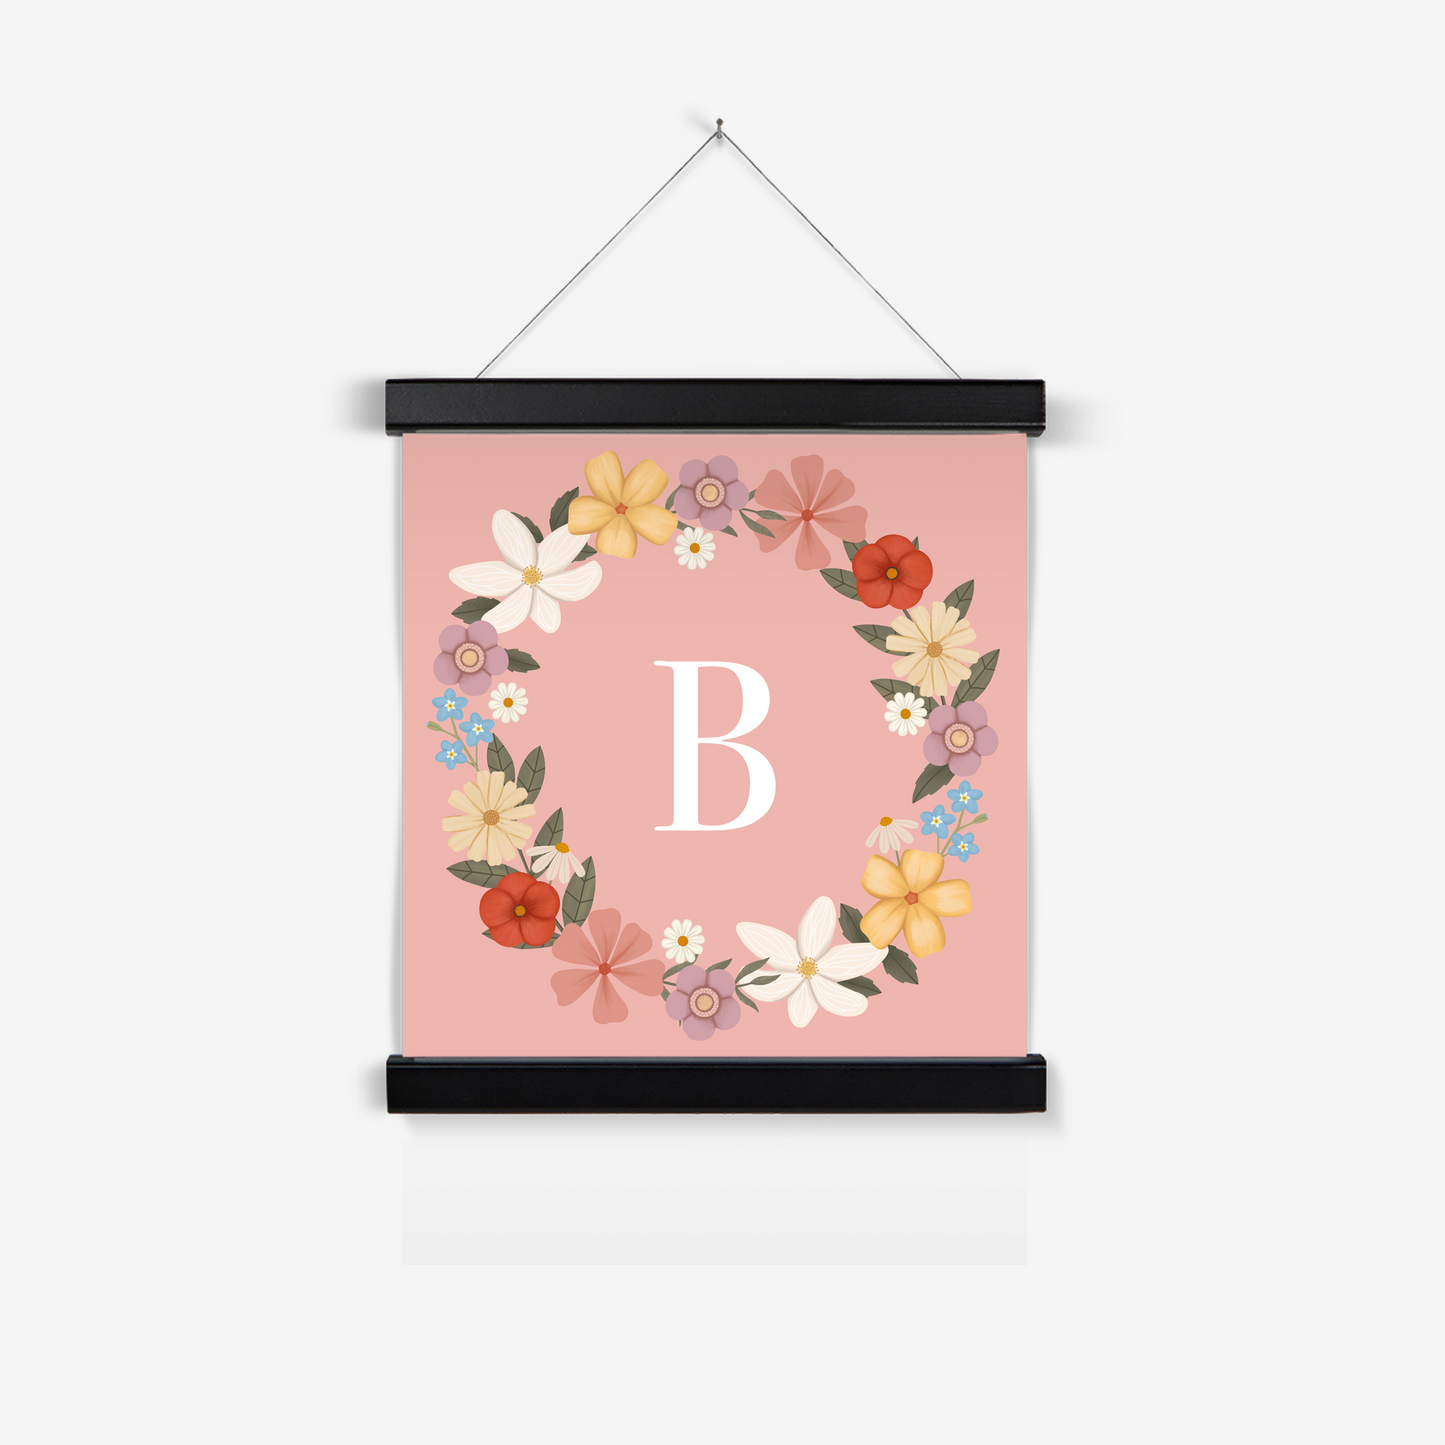 Personalised Floral Wreath in pink / Print with Hanger